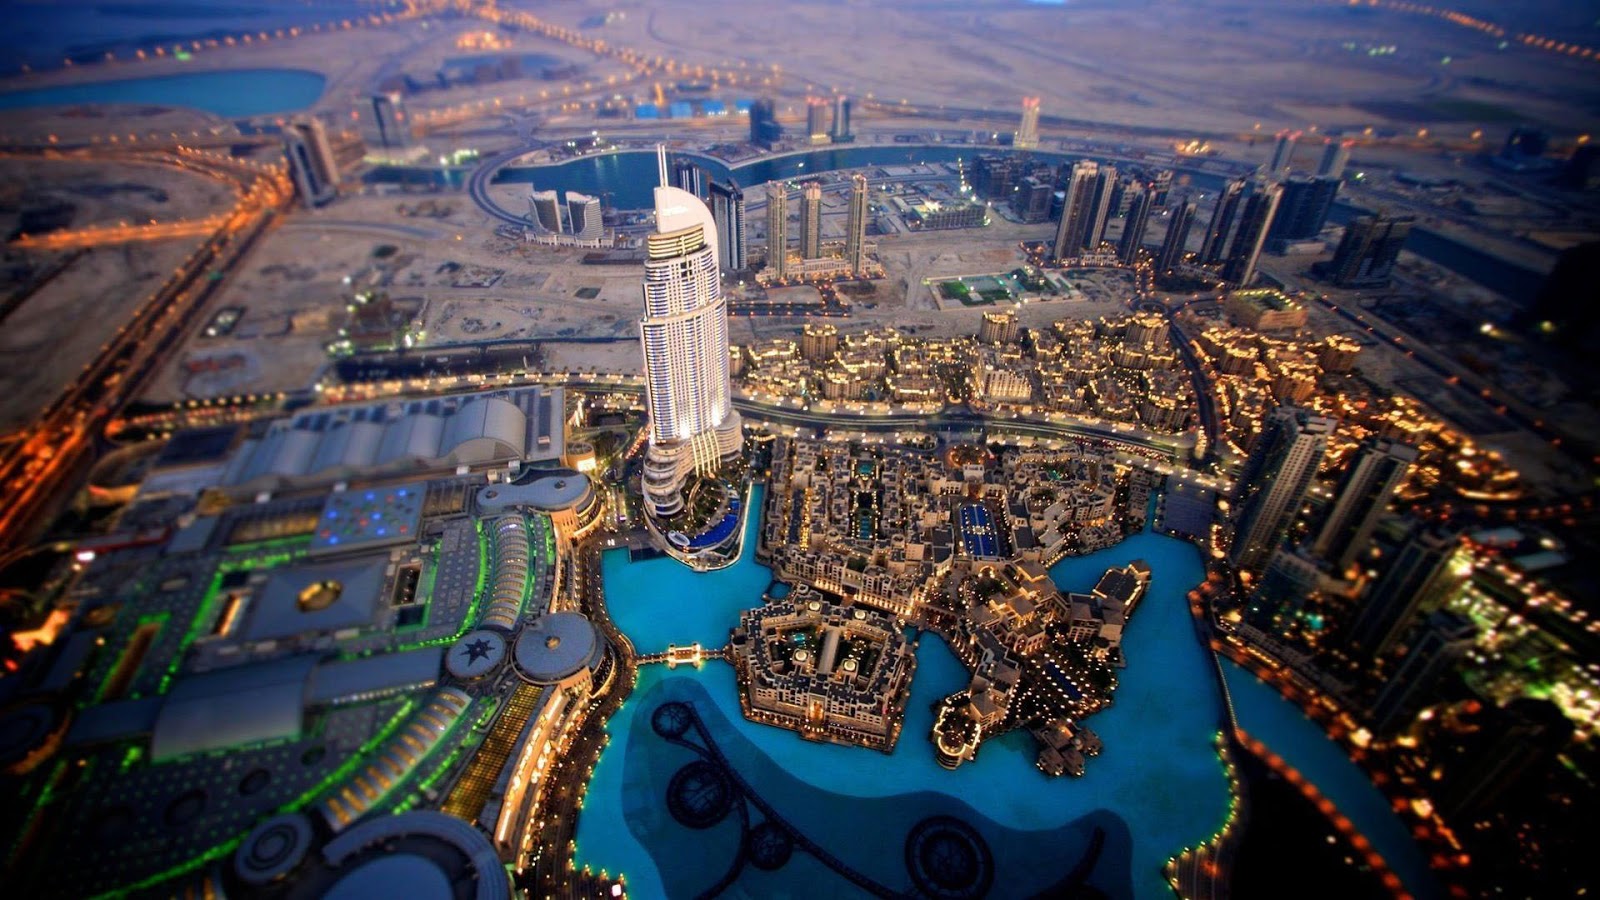 Dubai | HD Wallpapers (High Definition) | Free Background